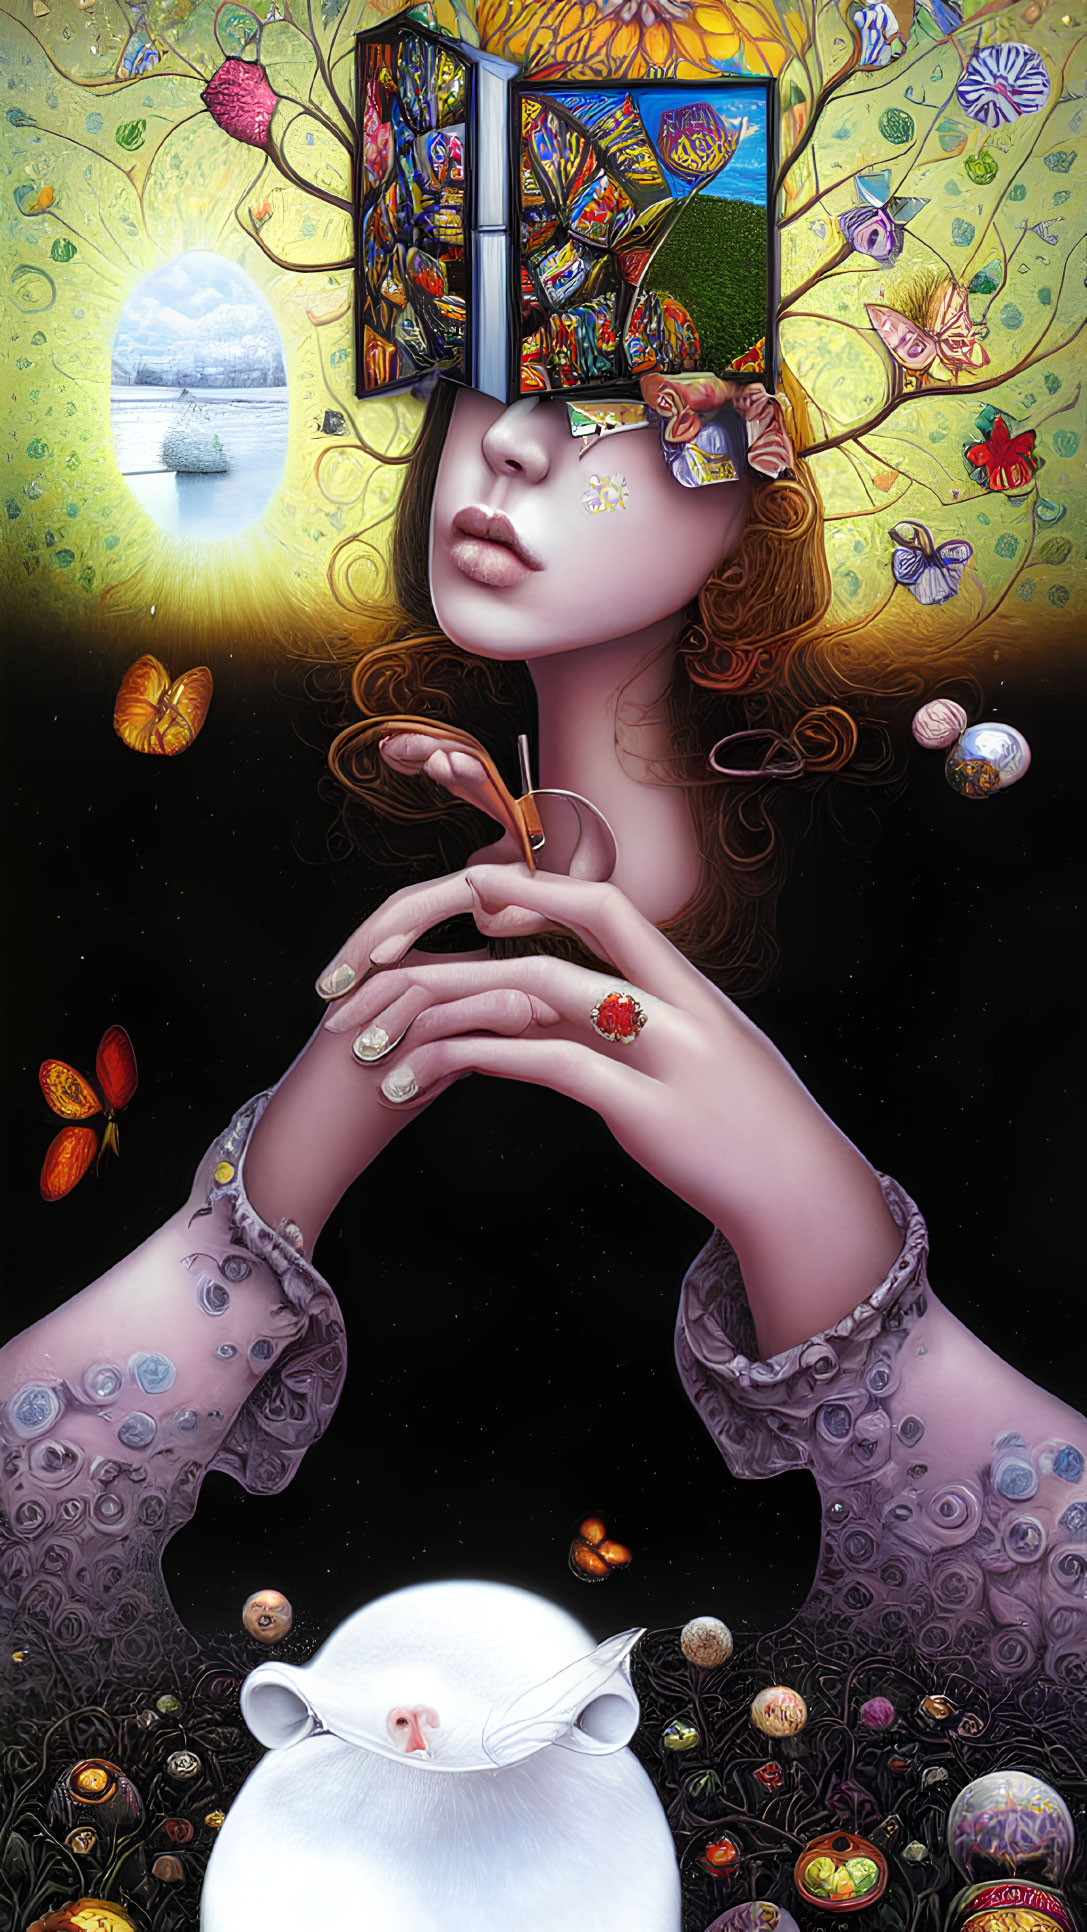 Colorful Woman with Headpiece, Butterflies, Cat, and Cosmic Background